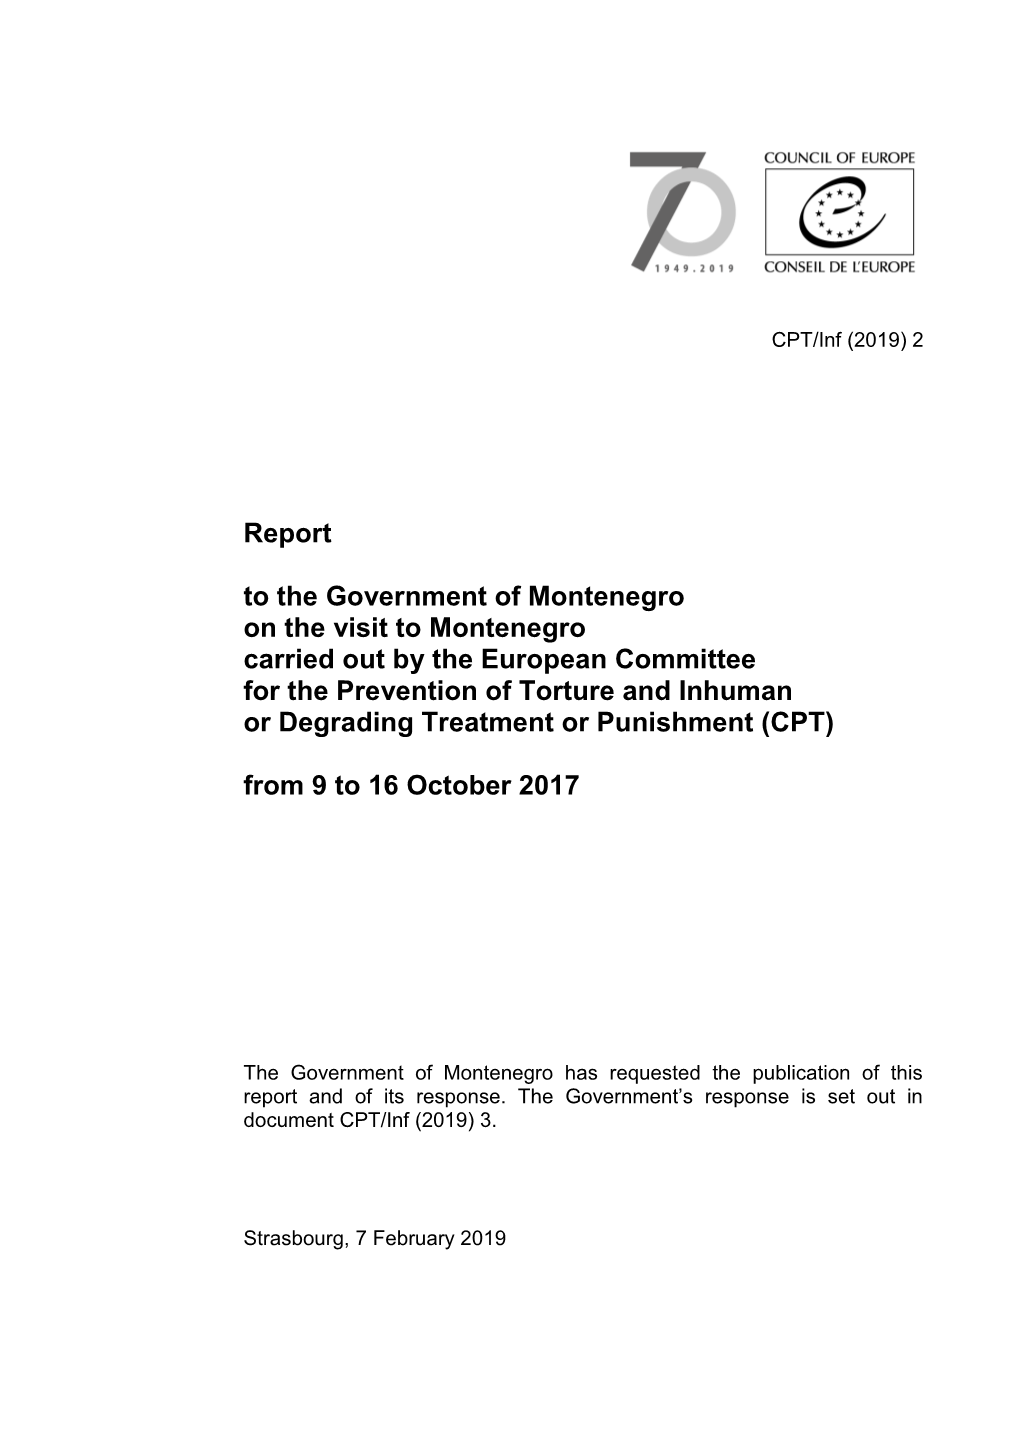 Report to the Government of Montenegro on the Visit To